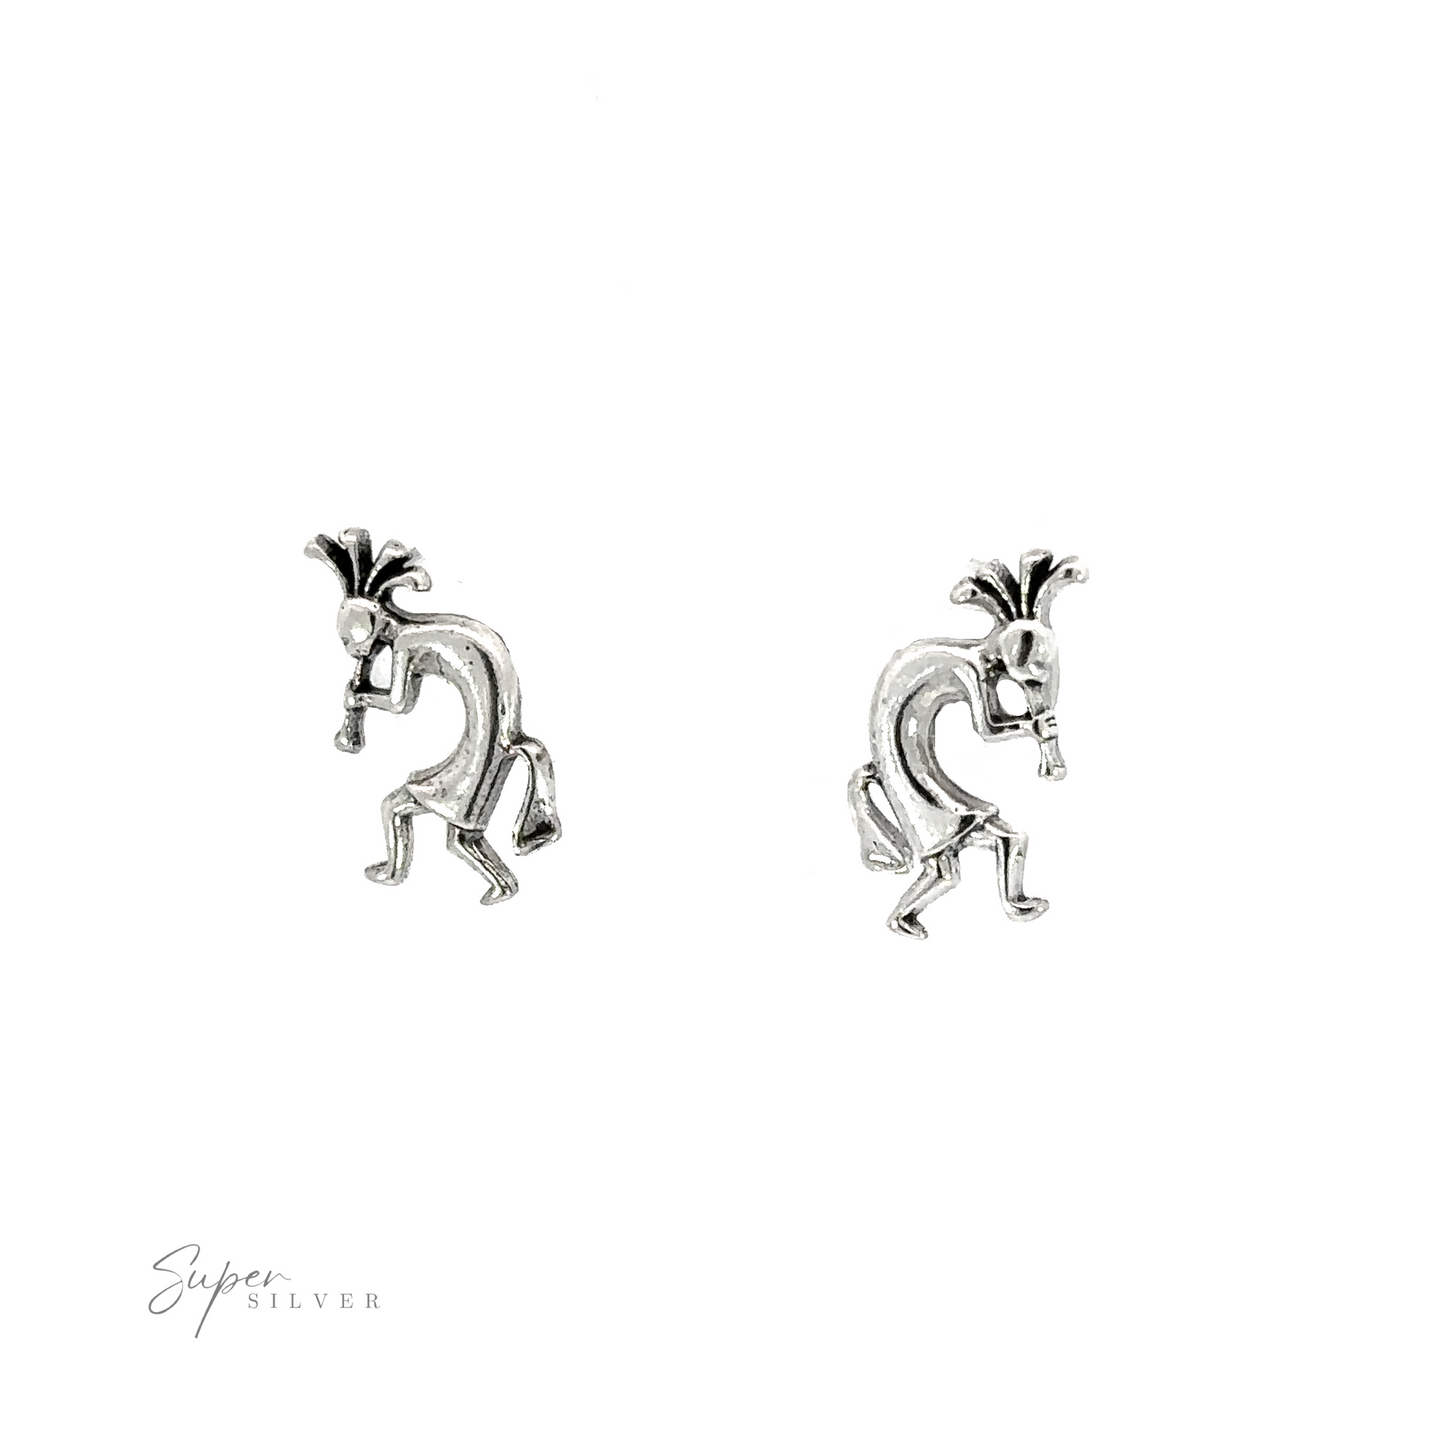 A meaningful accessory featuring Kokopelli Studs made of .925 sterling silver.